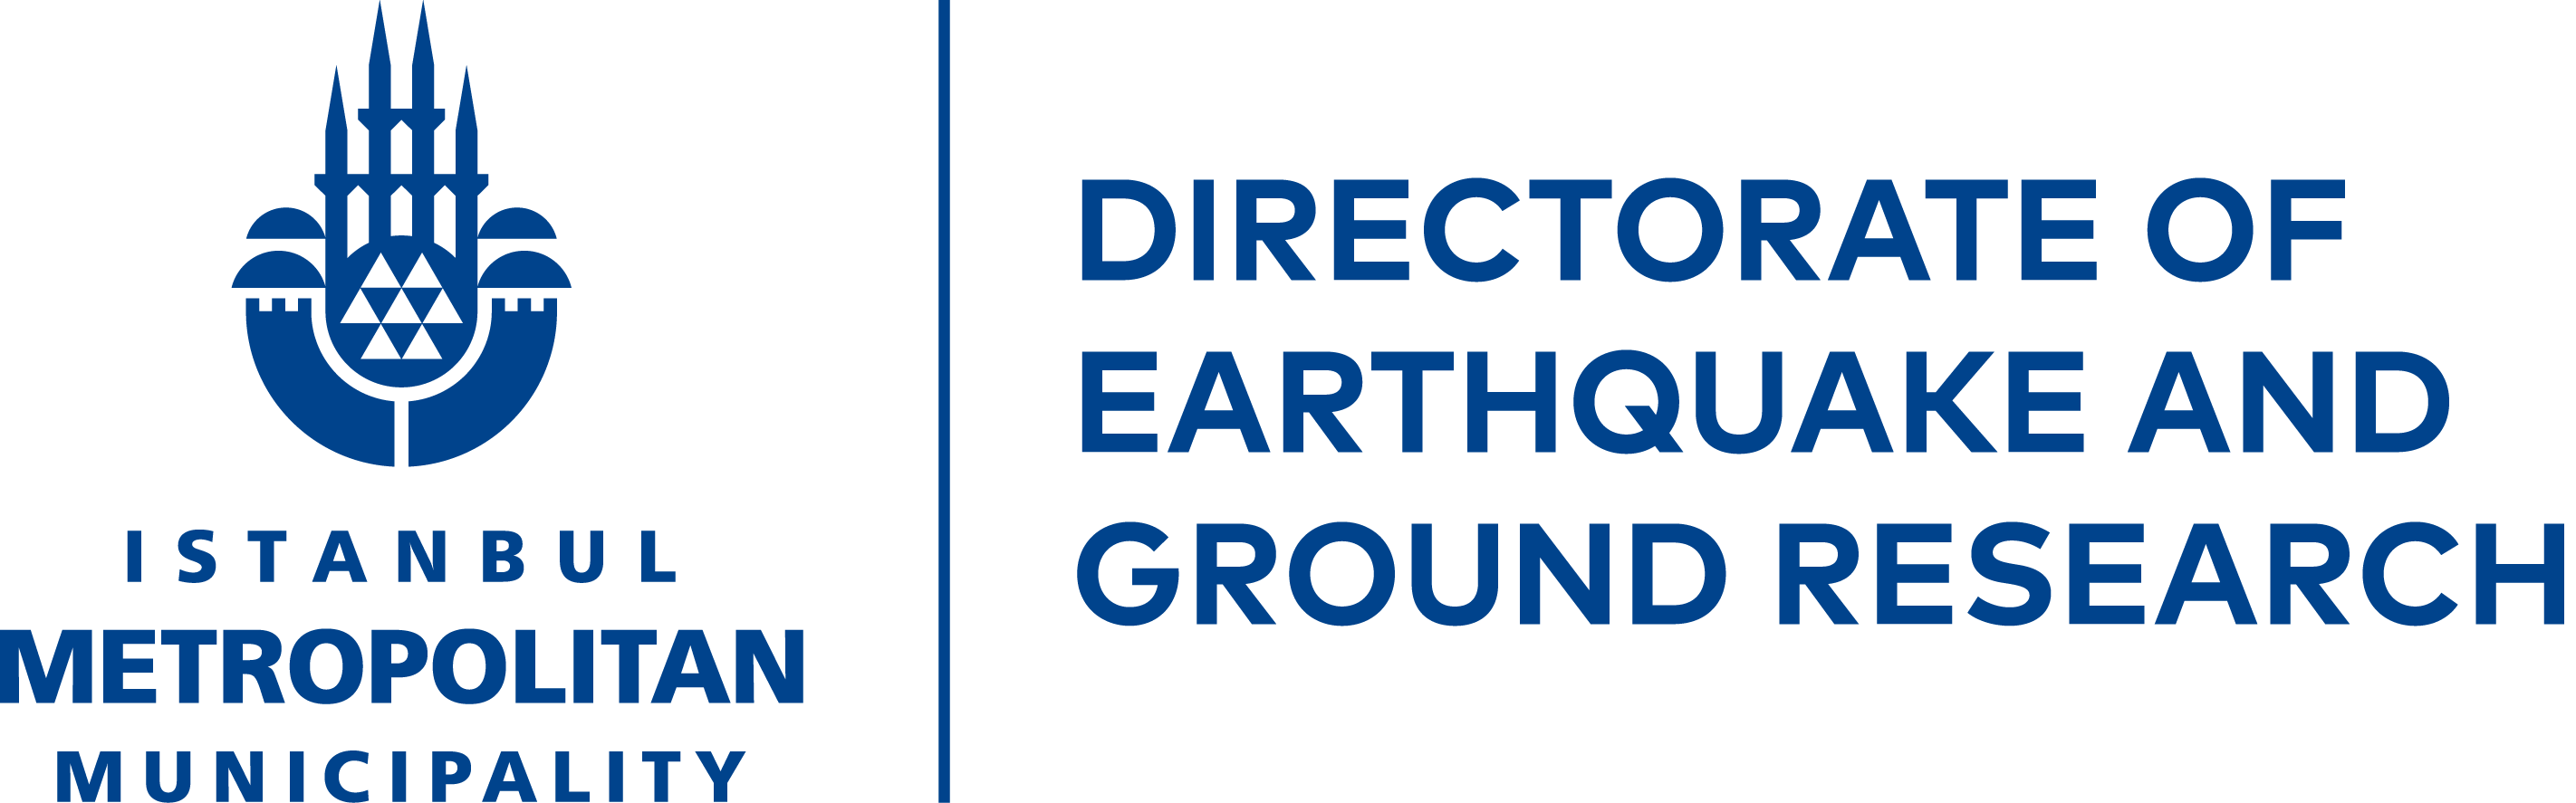 Directorate of Earthquake and Geotechnical Investigation